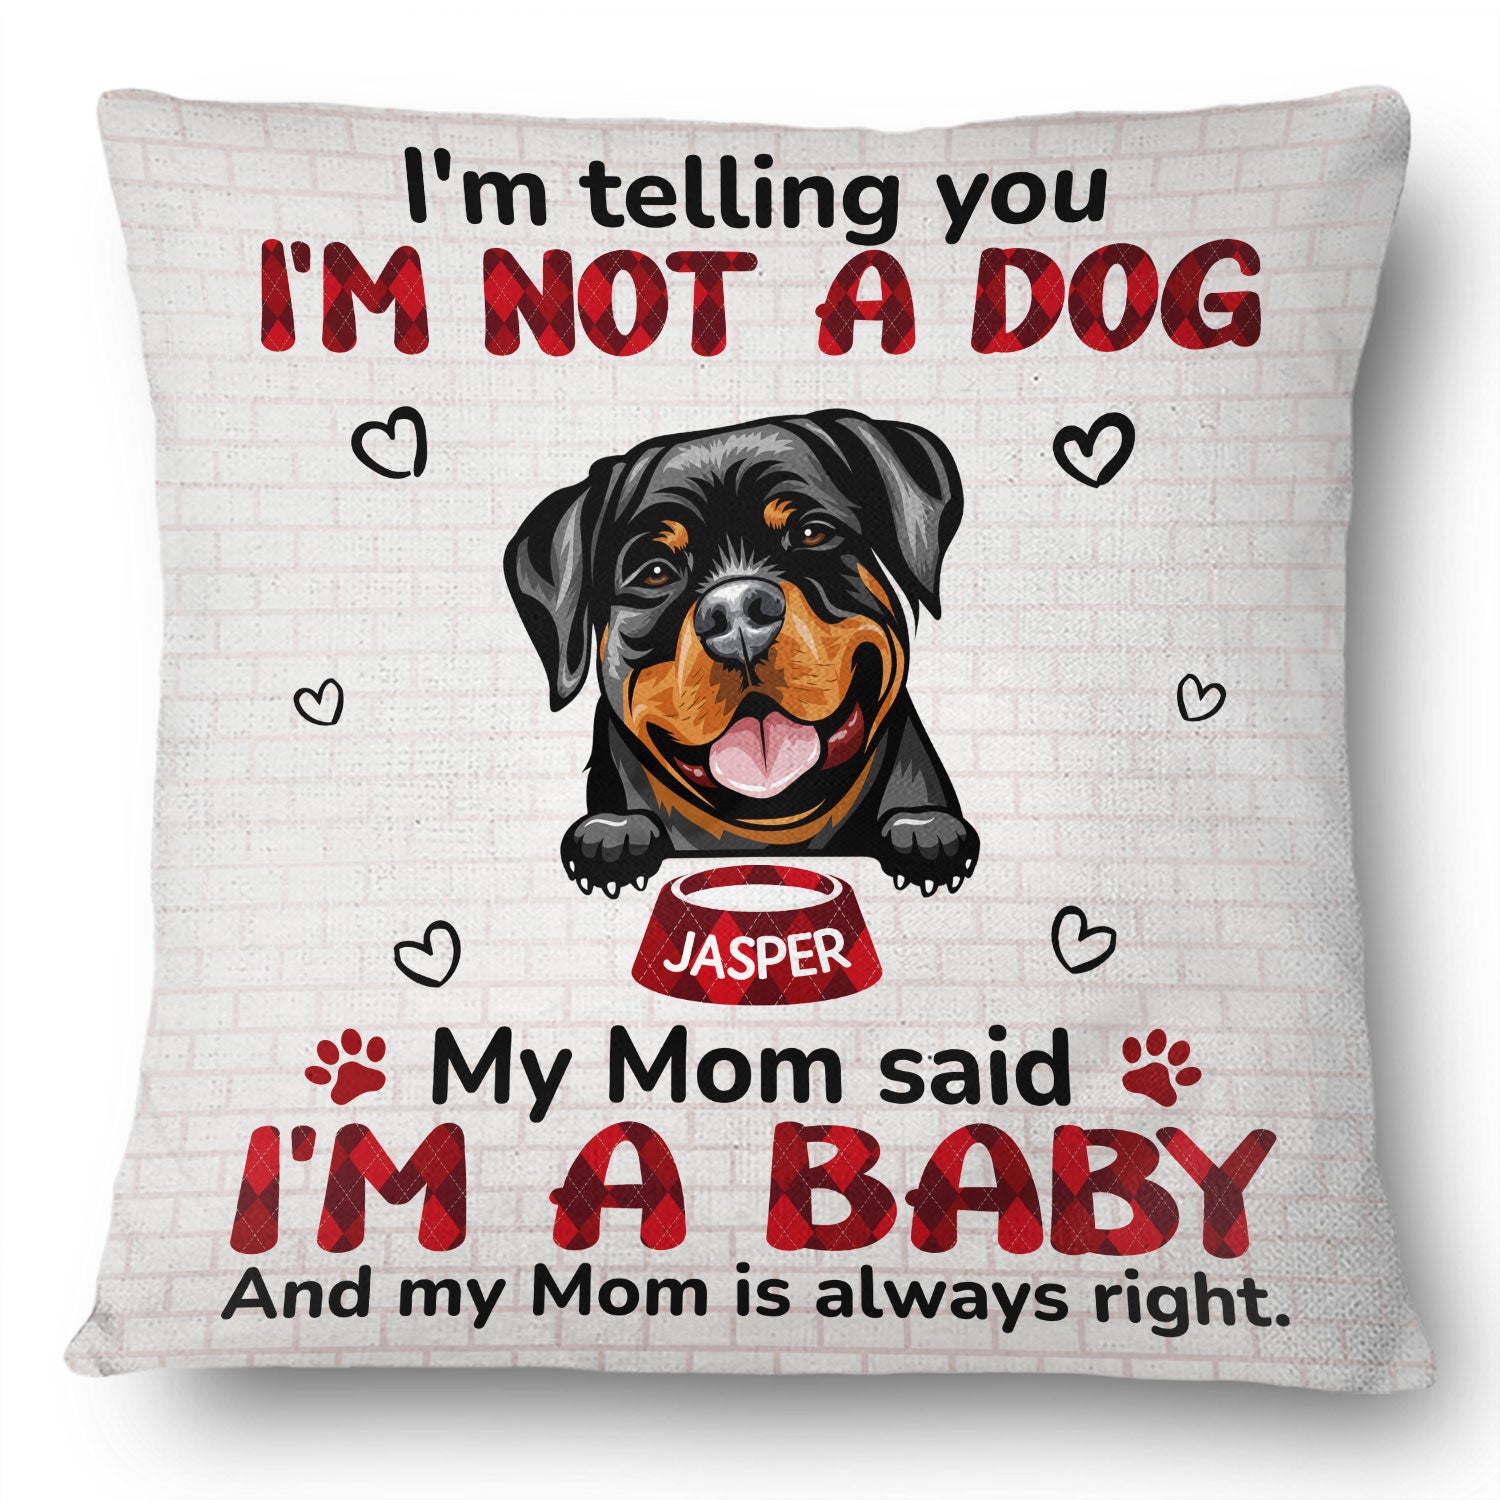 My Mom Said I‘m A Baby - Birthday, Loving, Funny, Gift For Dog Mom, Cat Mom, Cat Dad, Dog Dad, Pet Lover - Personalized Custom Pillow